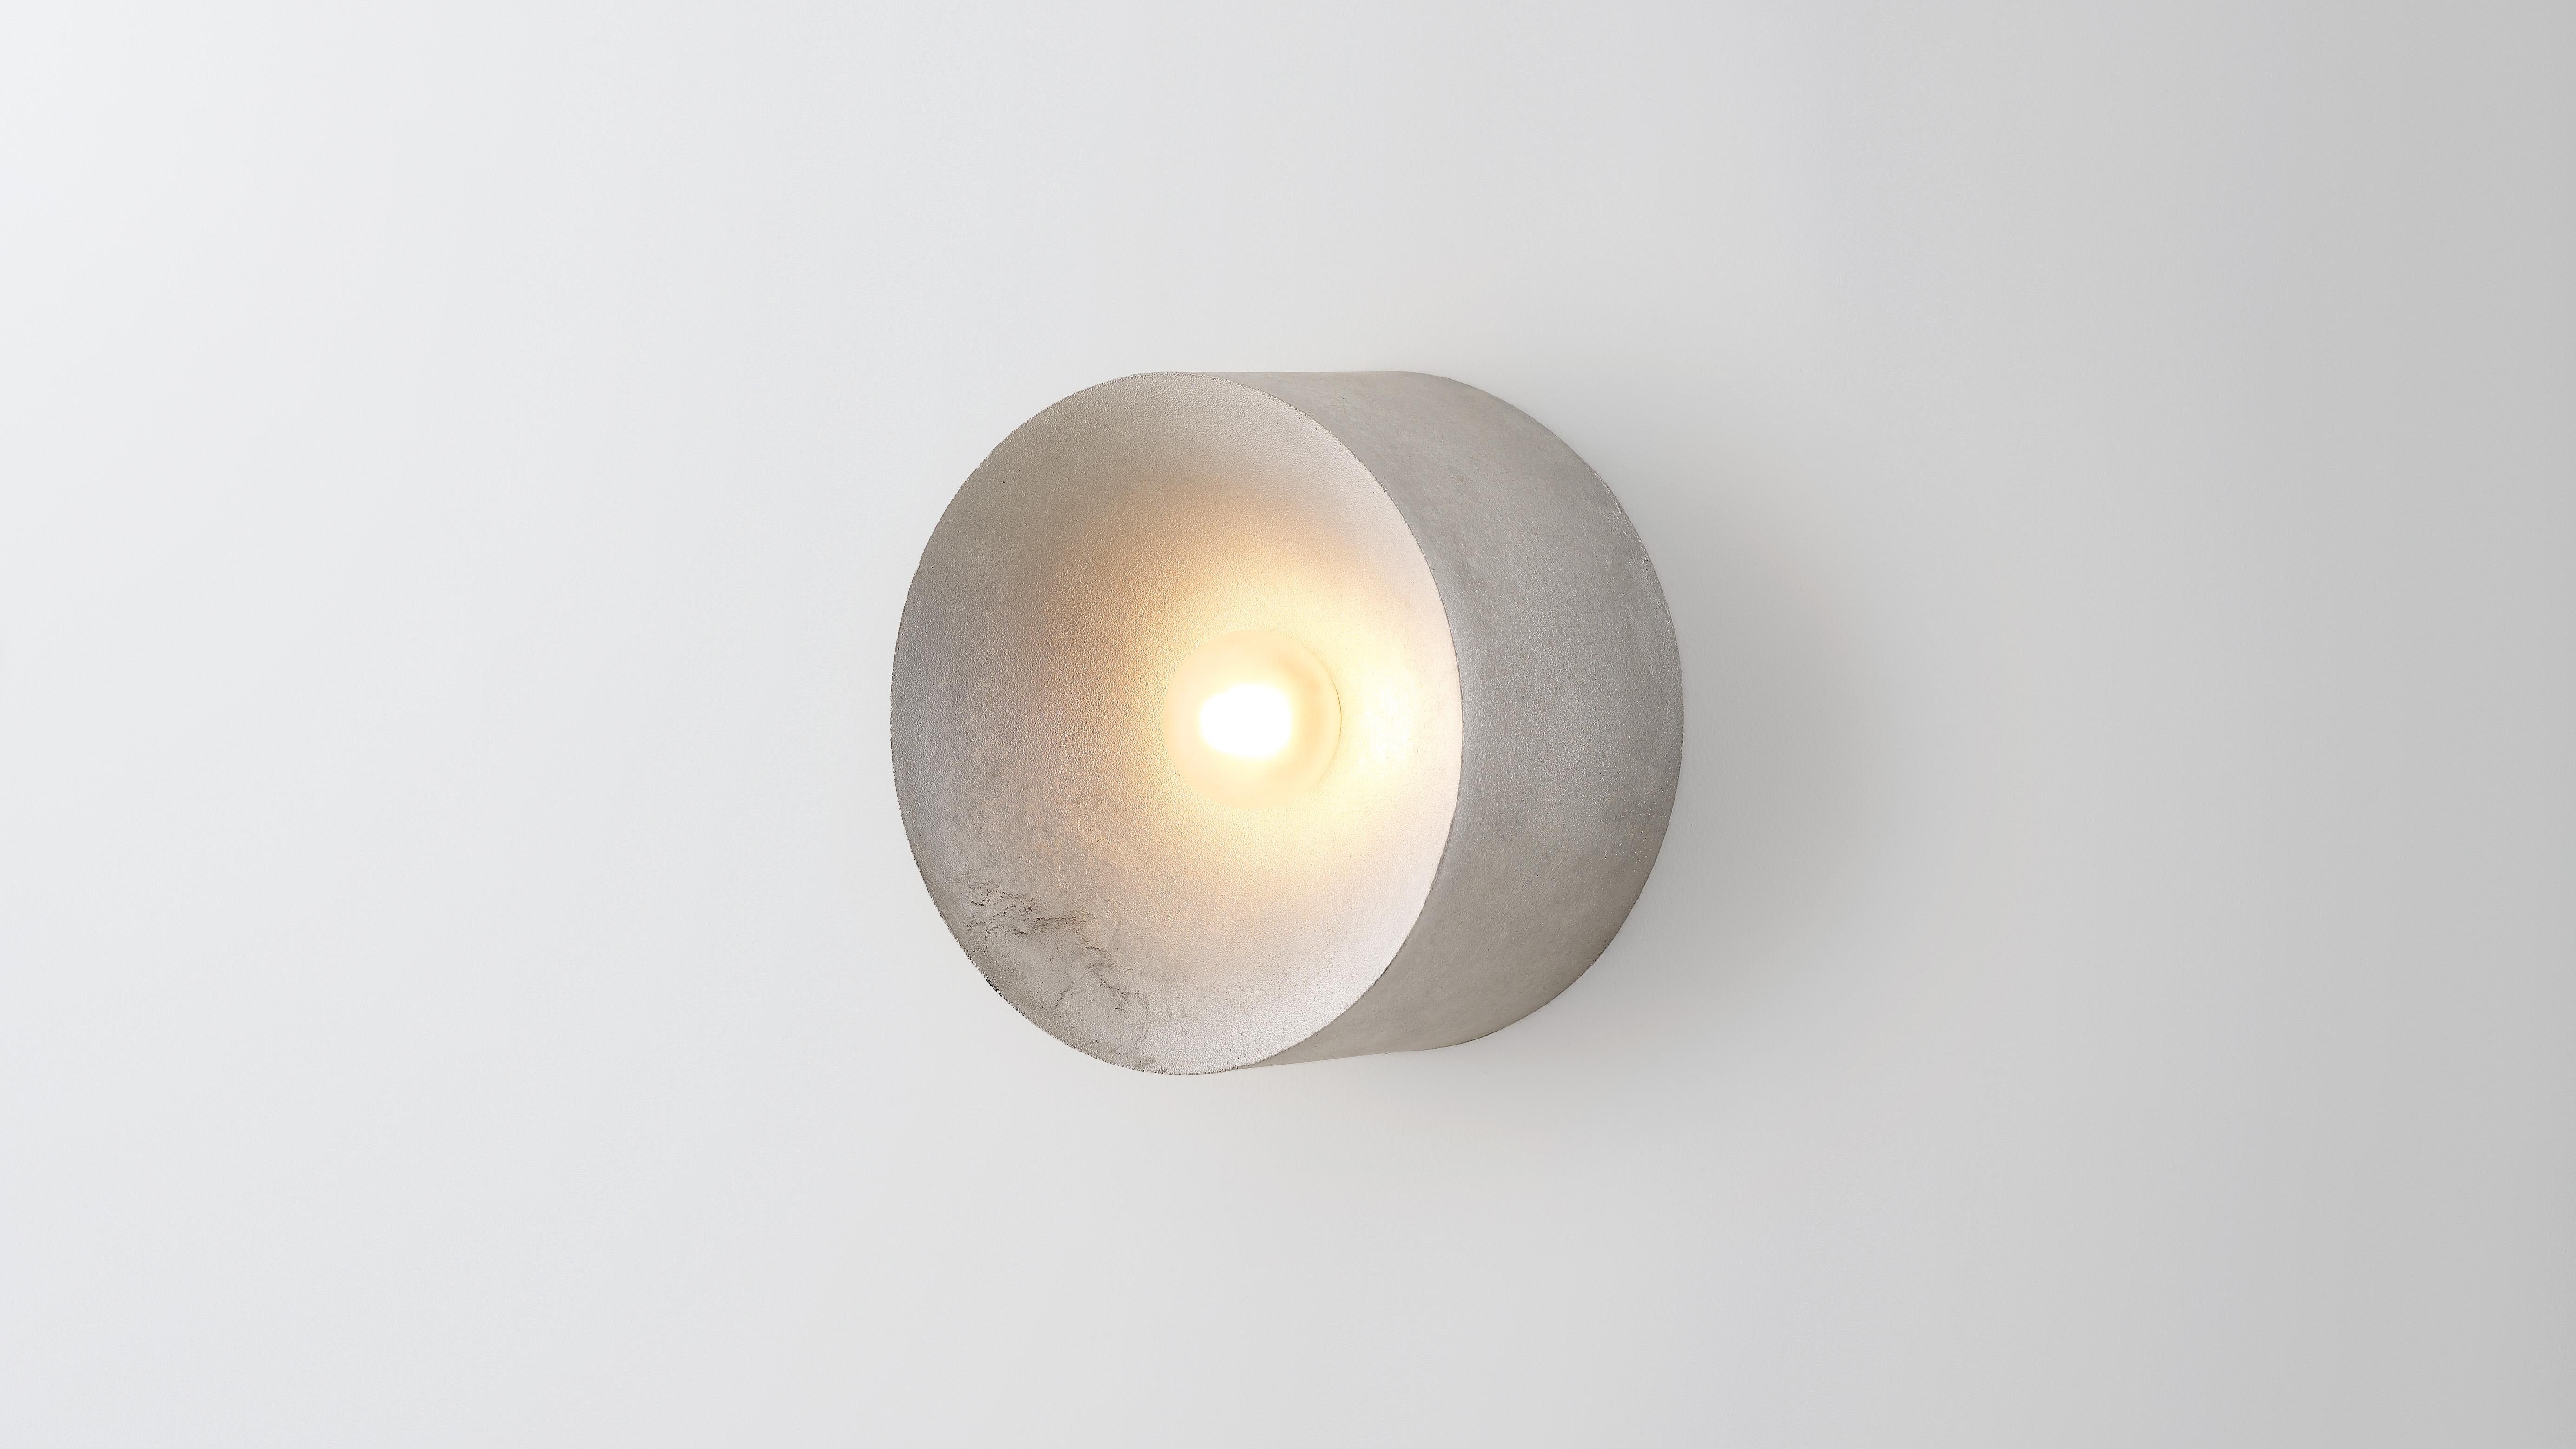 Anton in aluminium by Volker Haug
Anton series
Dimensions: W 18, H 18, D 10.3 cm
Materials: Cast aluminium
Finish: Raw 
Lamp: G9 LED (240V / 120V US). 12V option available
Glass bulb: 4.5 cm Ø, frosted
Weight: 1.5kg

Form follows force. The Anton